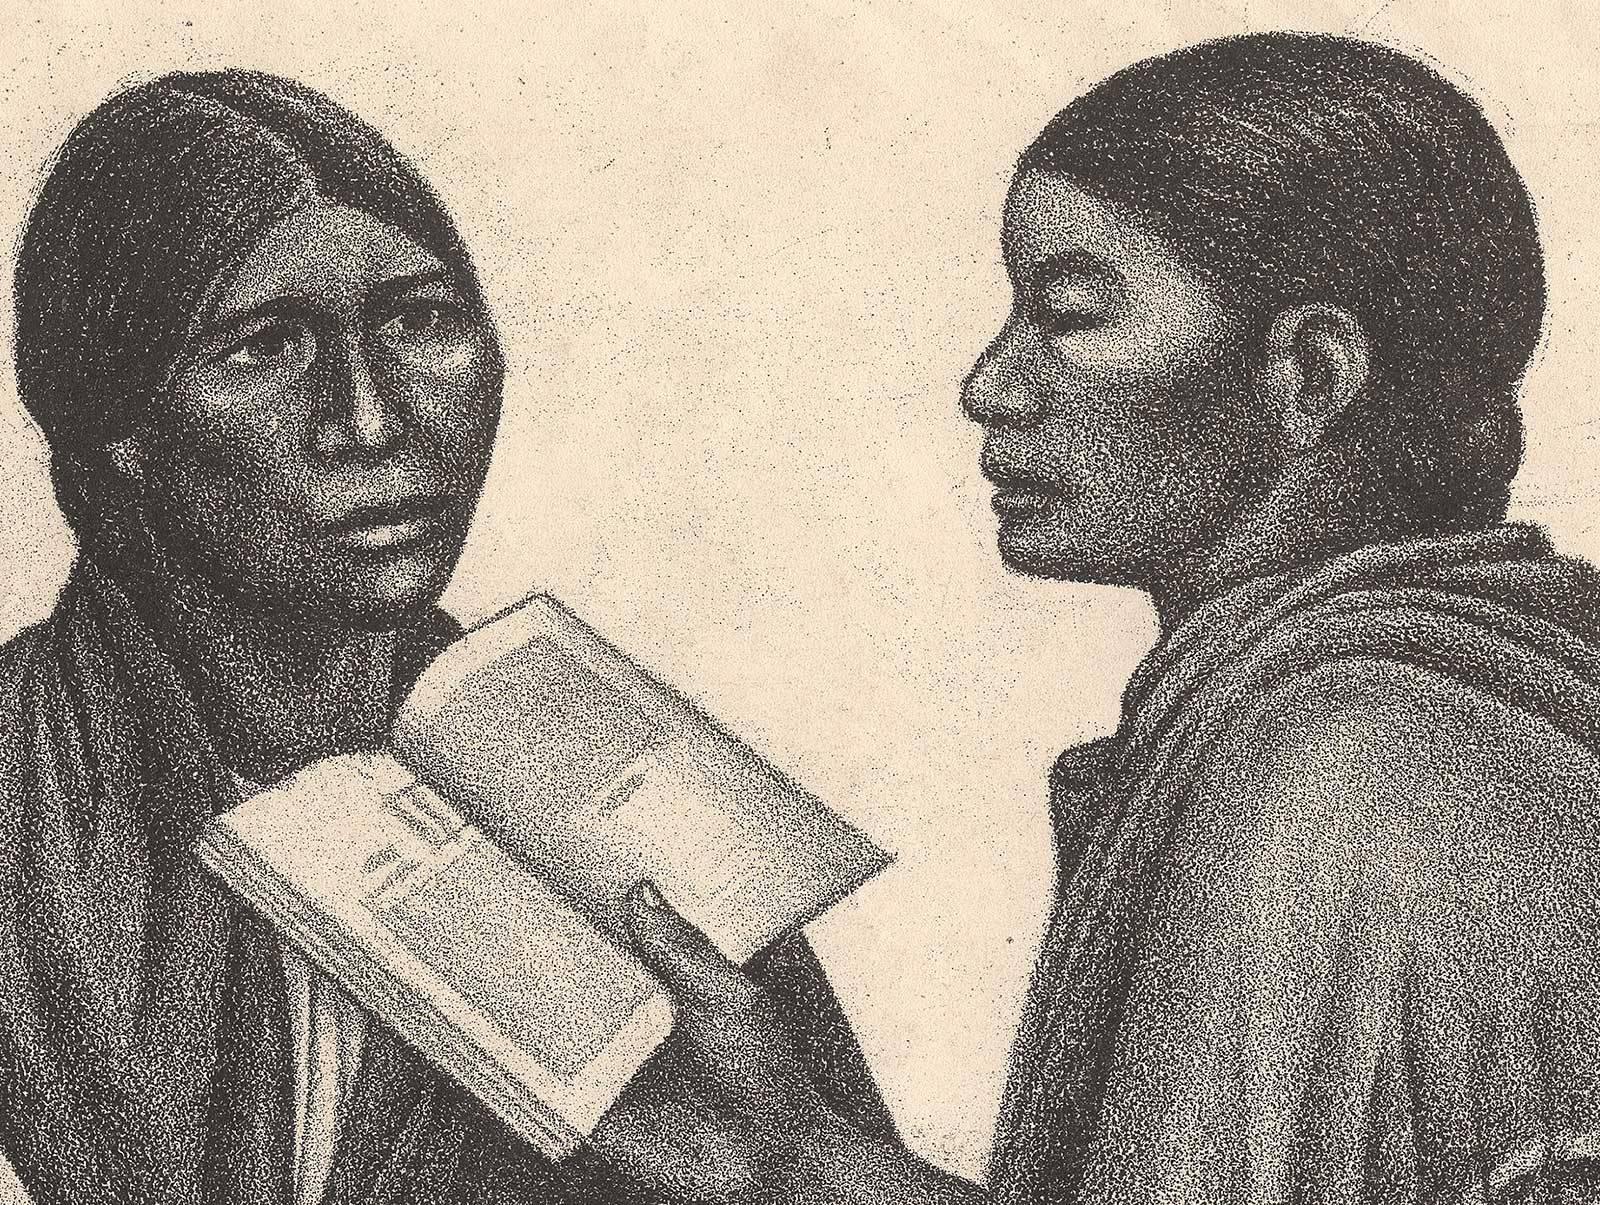 Alphabetization (Mexican teacher helping  the poor to learn skill of reading) - American Modern Print by Elizabeth Catlett